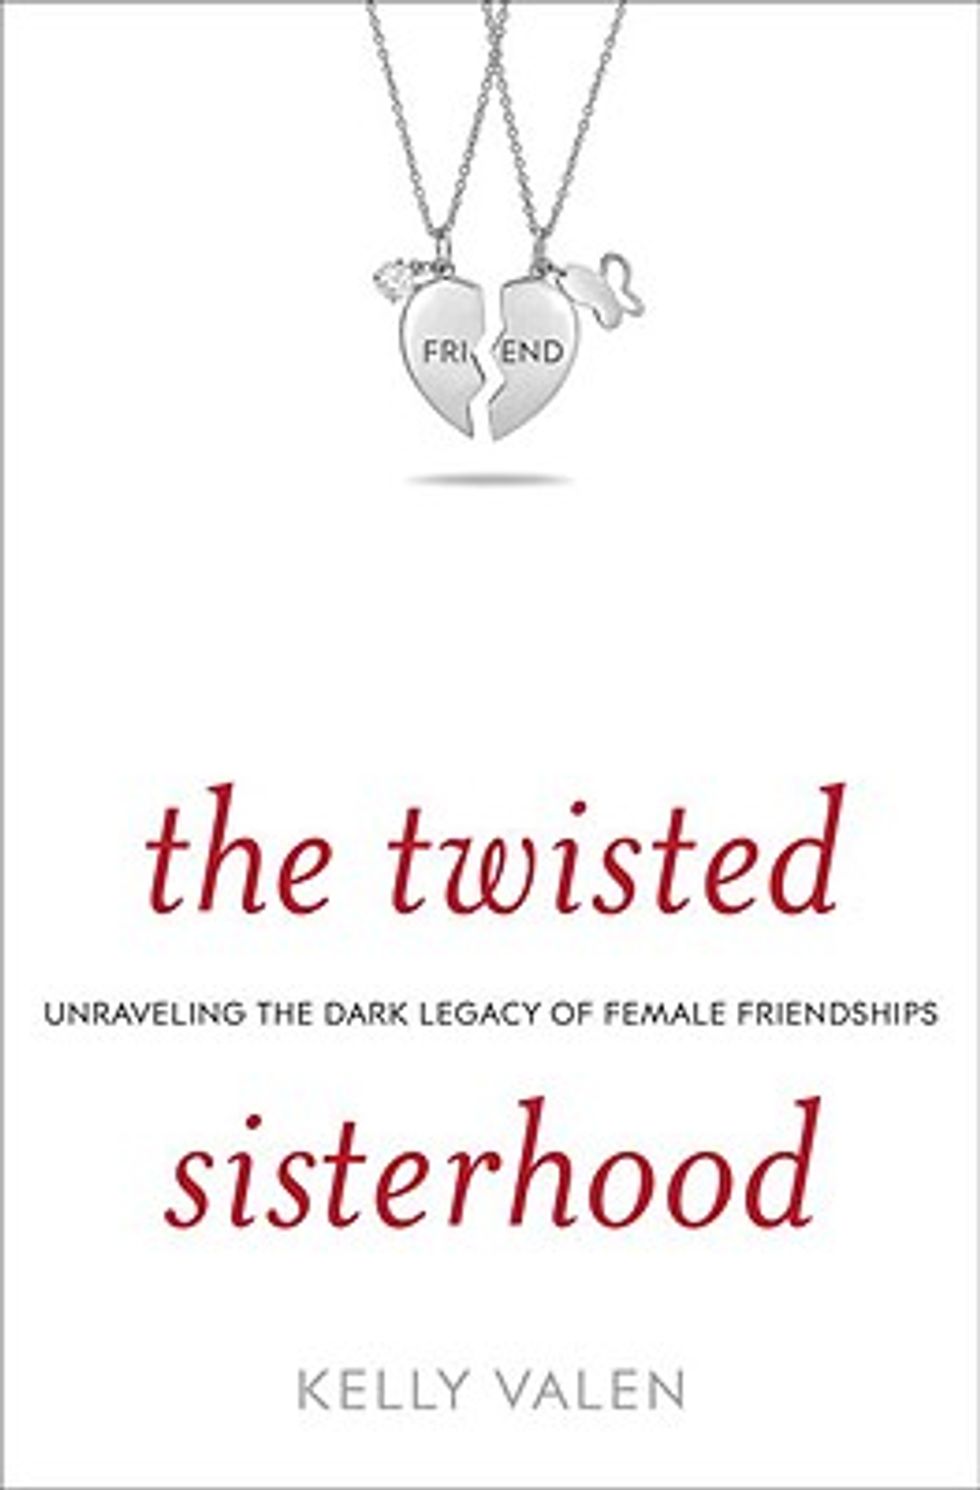 Local Author Kelly Valen On the Twisted World of Female Friendships